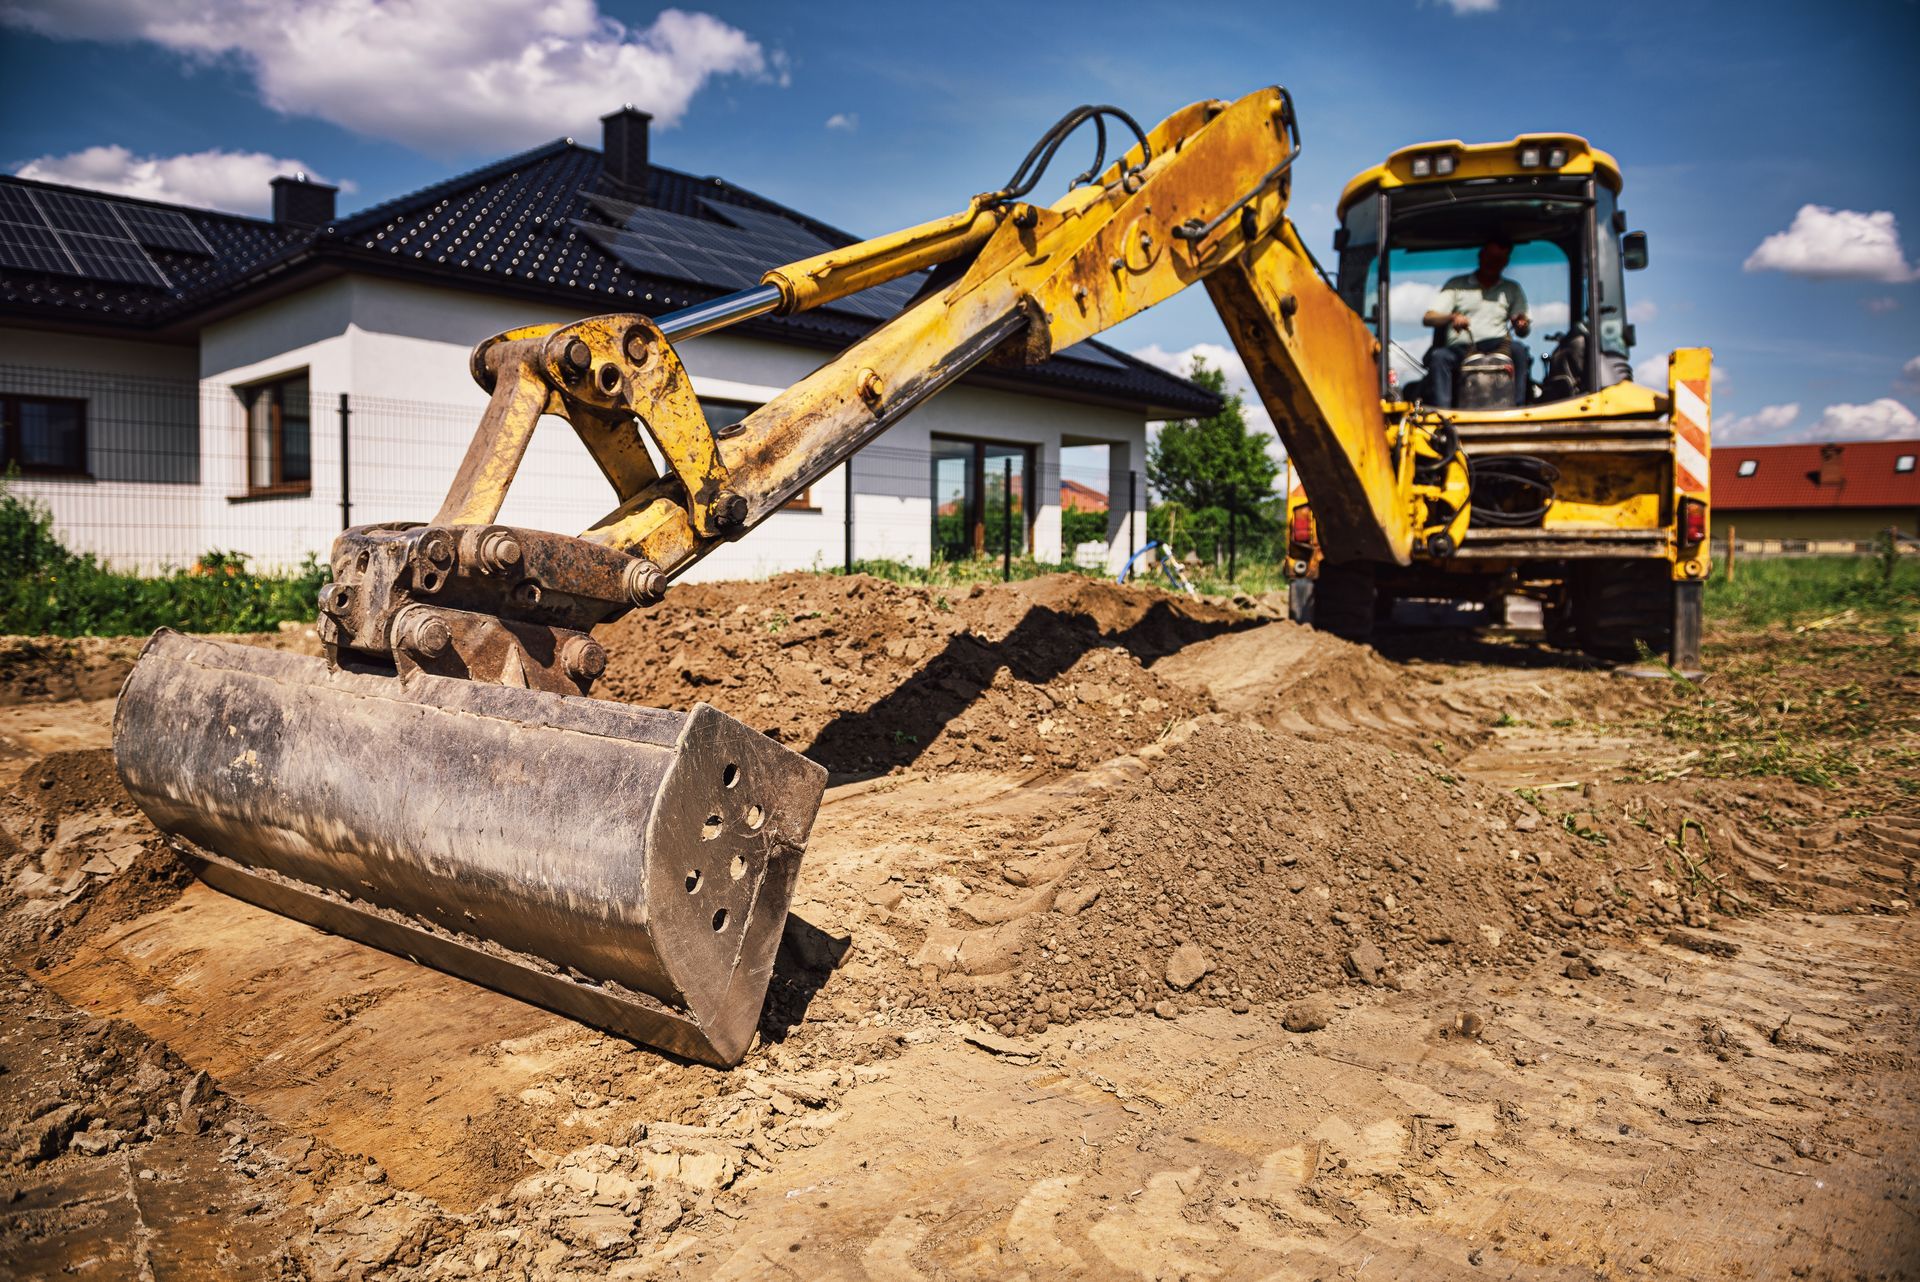 a yellow excavator is digging a hole in a dirt field in behind a house to start the foundation for an inground swimming pool